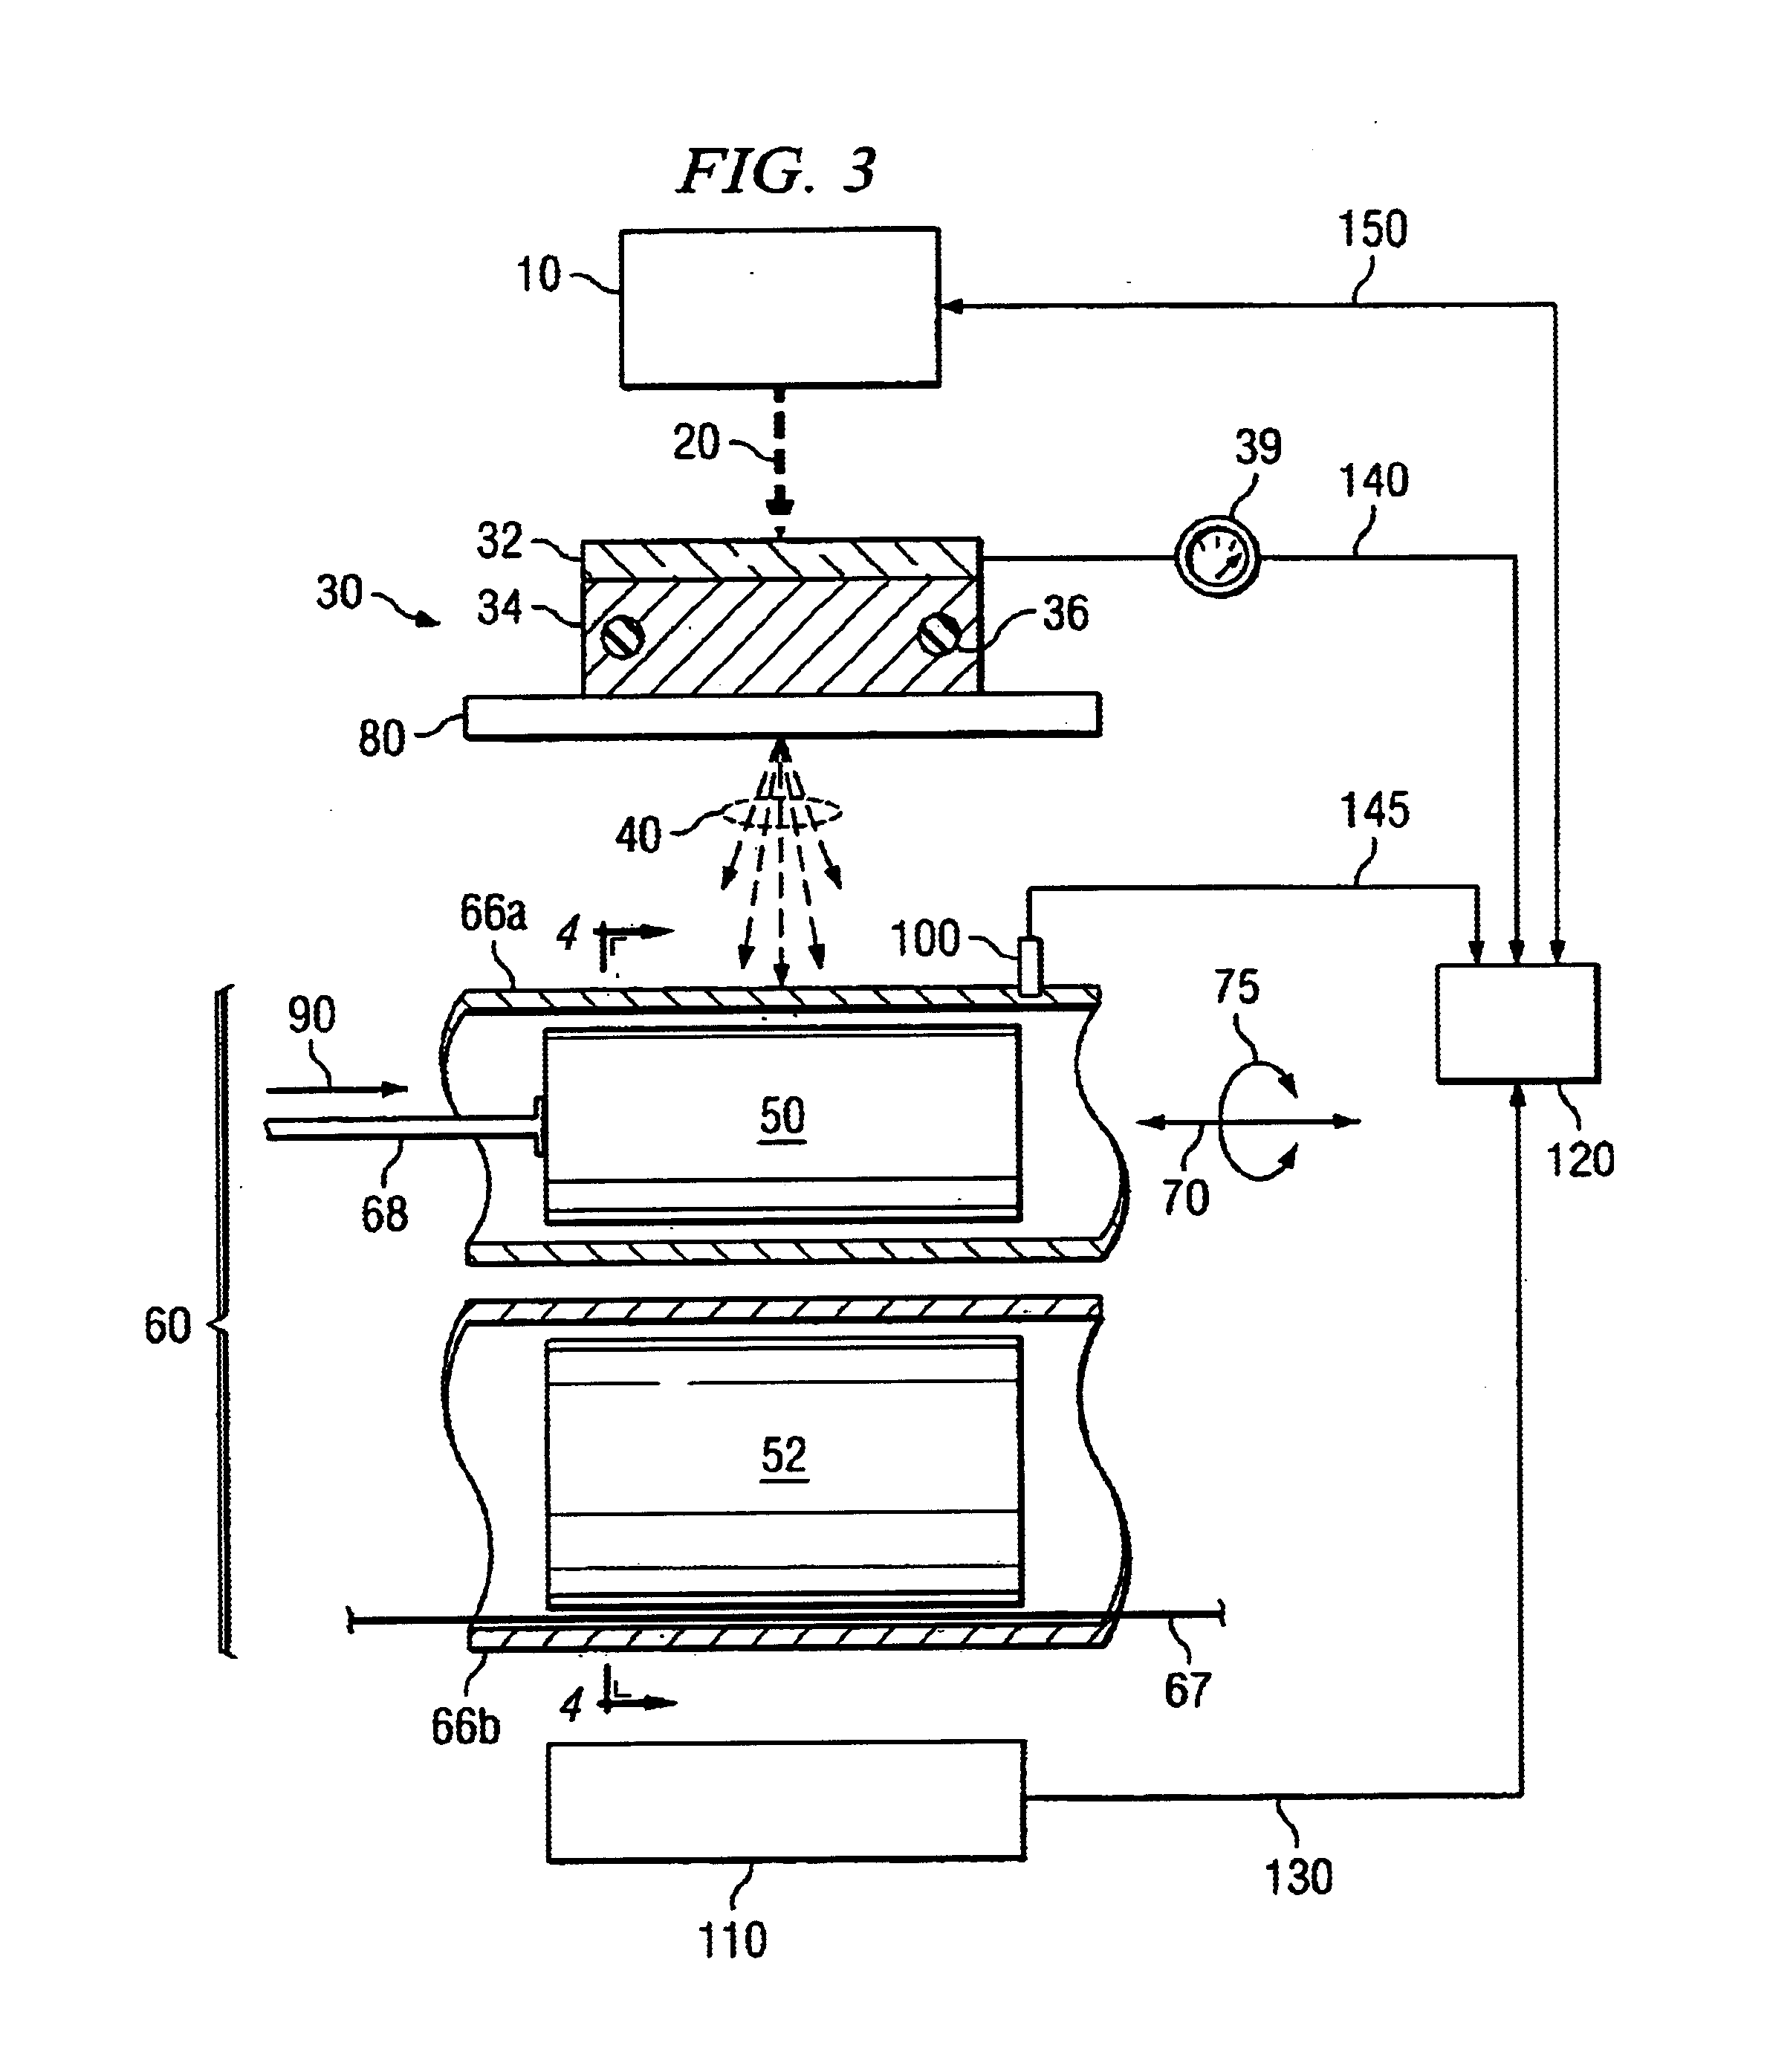 Method and apparatus for producing radioactive materials for medical treatment using x-rays produced by an electron accelerator